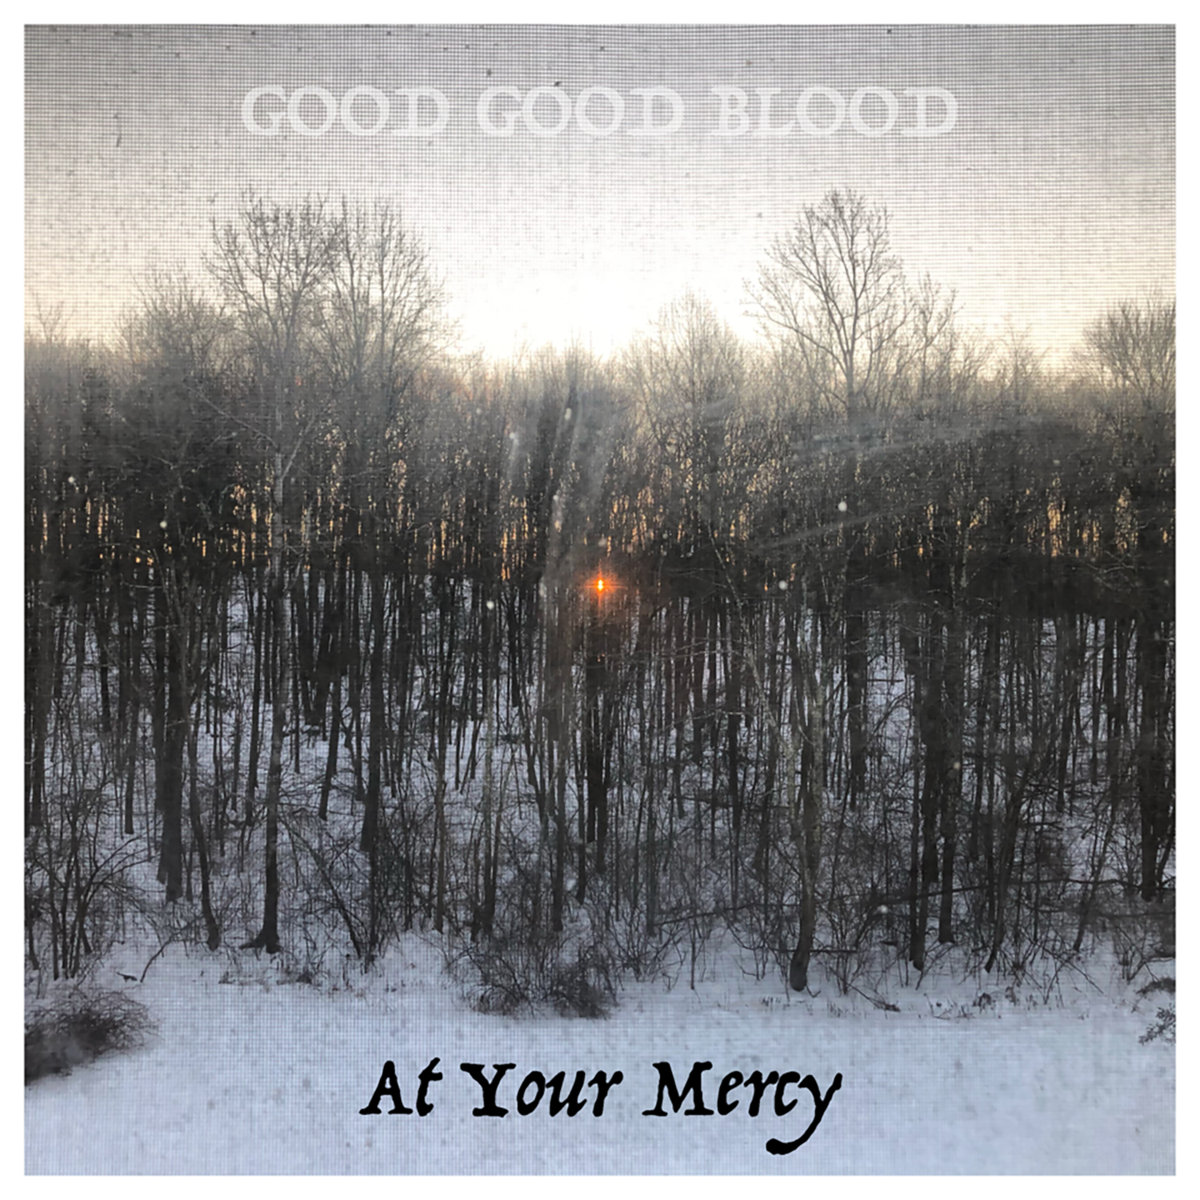 Artwork for At Your Mercy by Good Good Blood